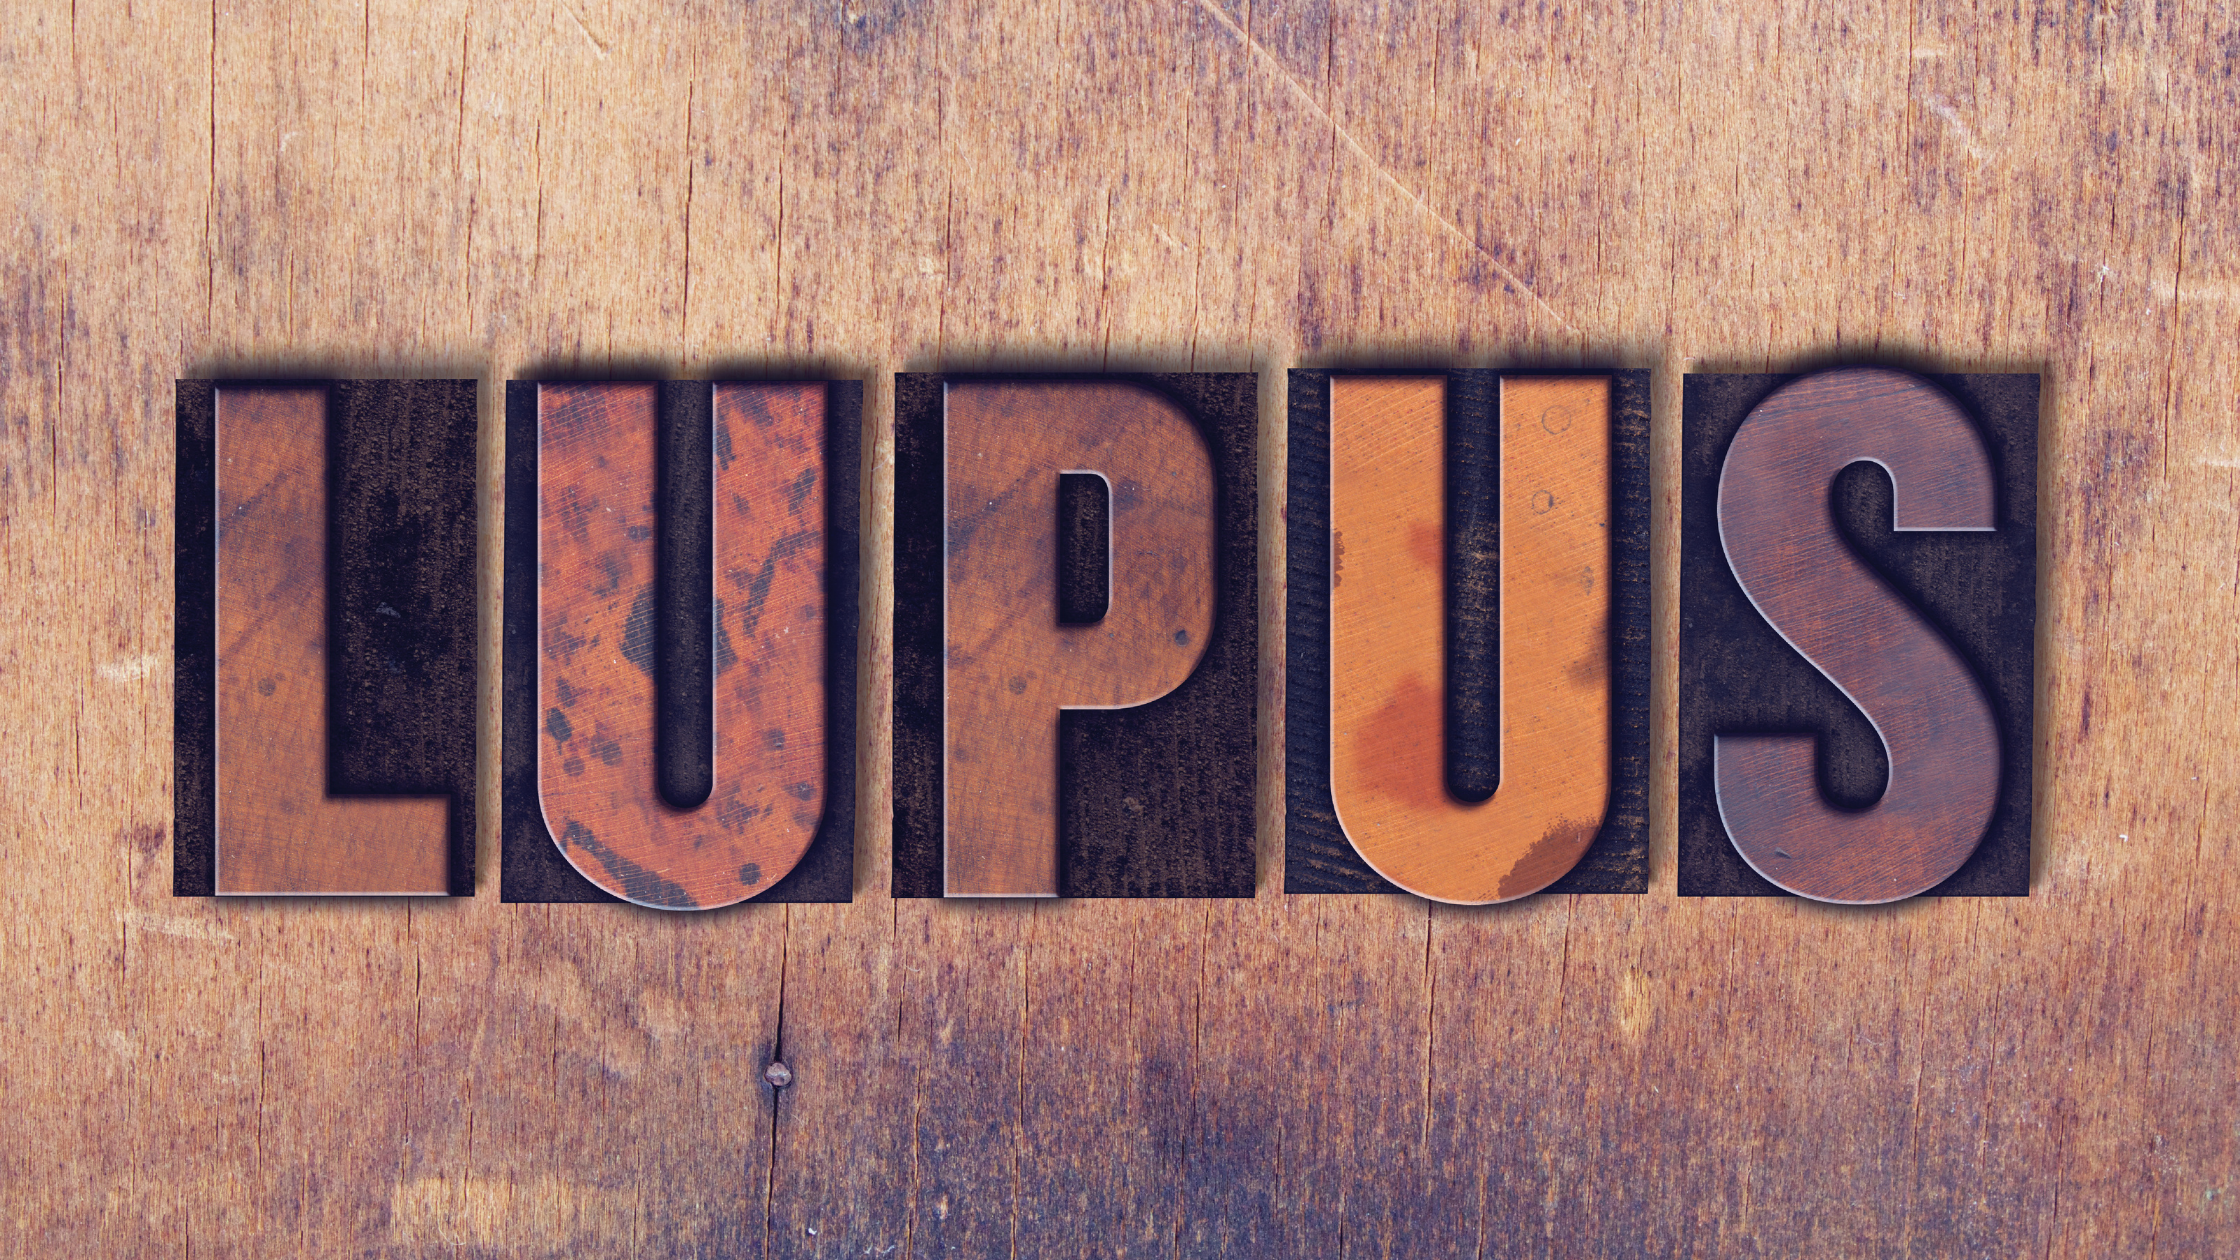 Wooden block letters spell out "Lupus"